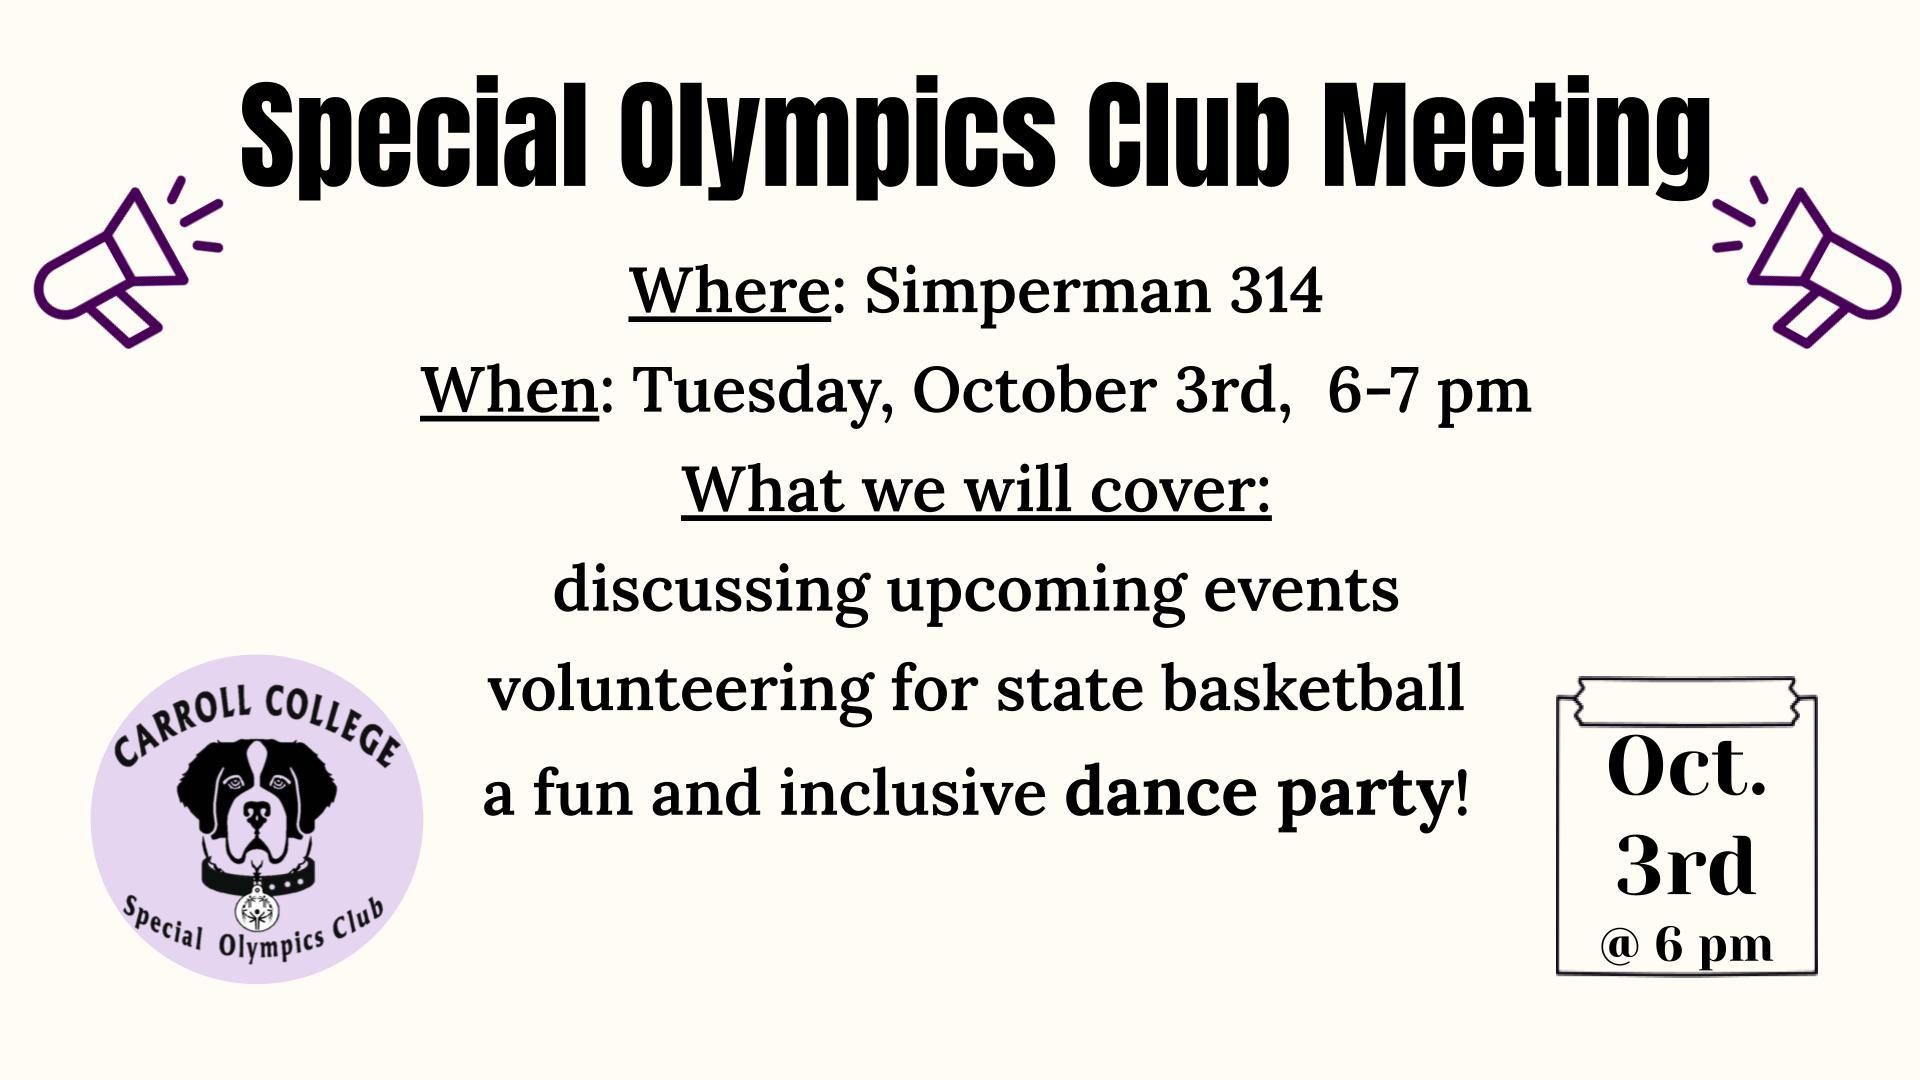 Special Olympics Club Meeting